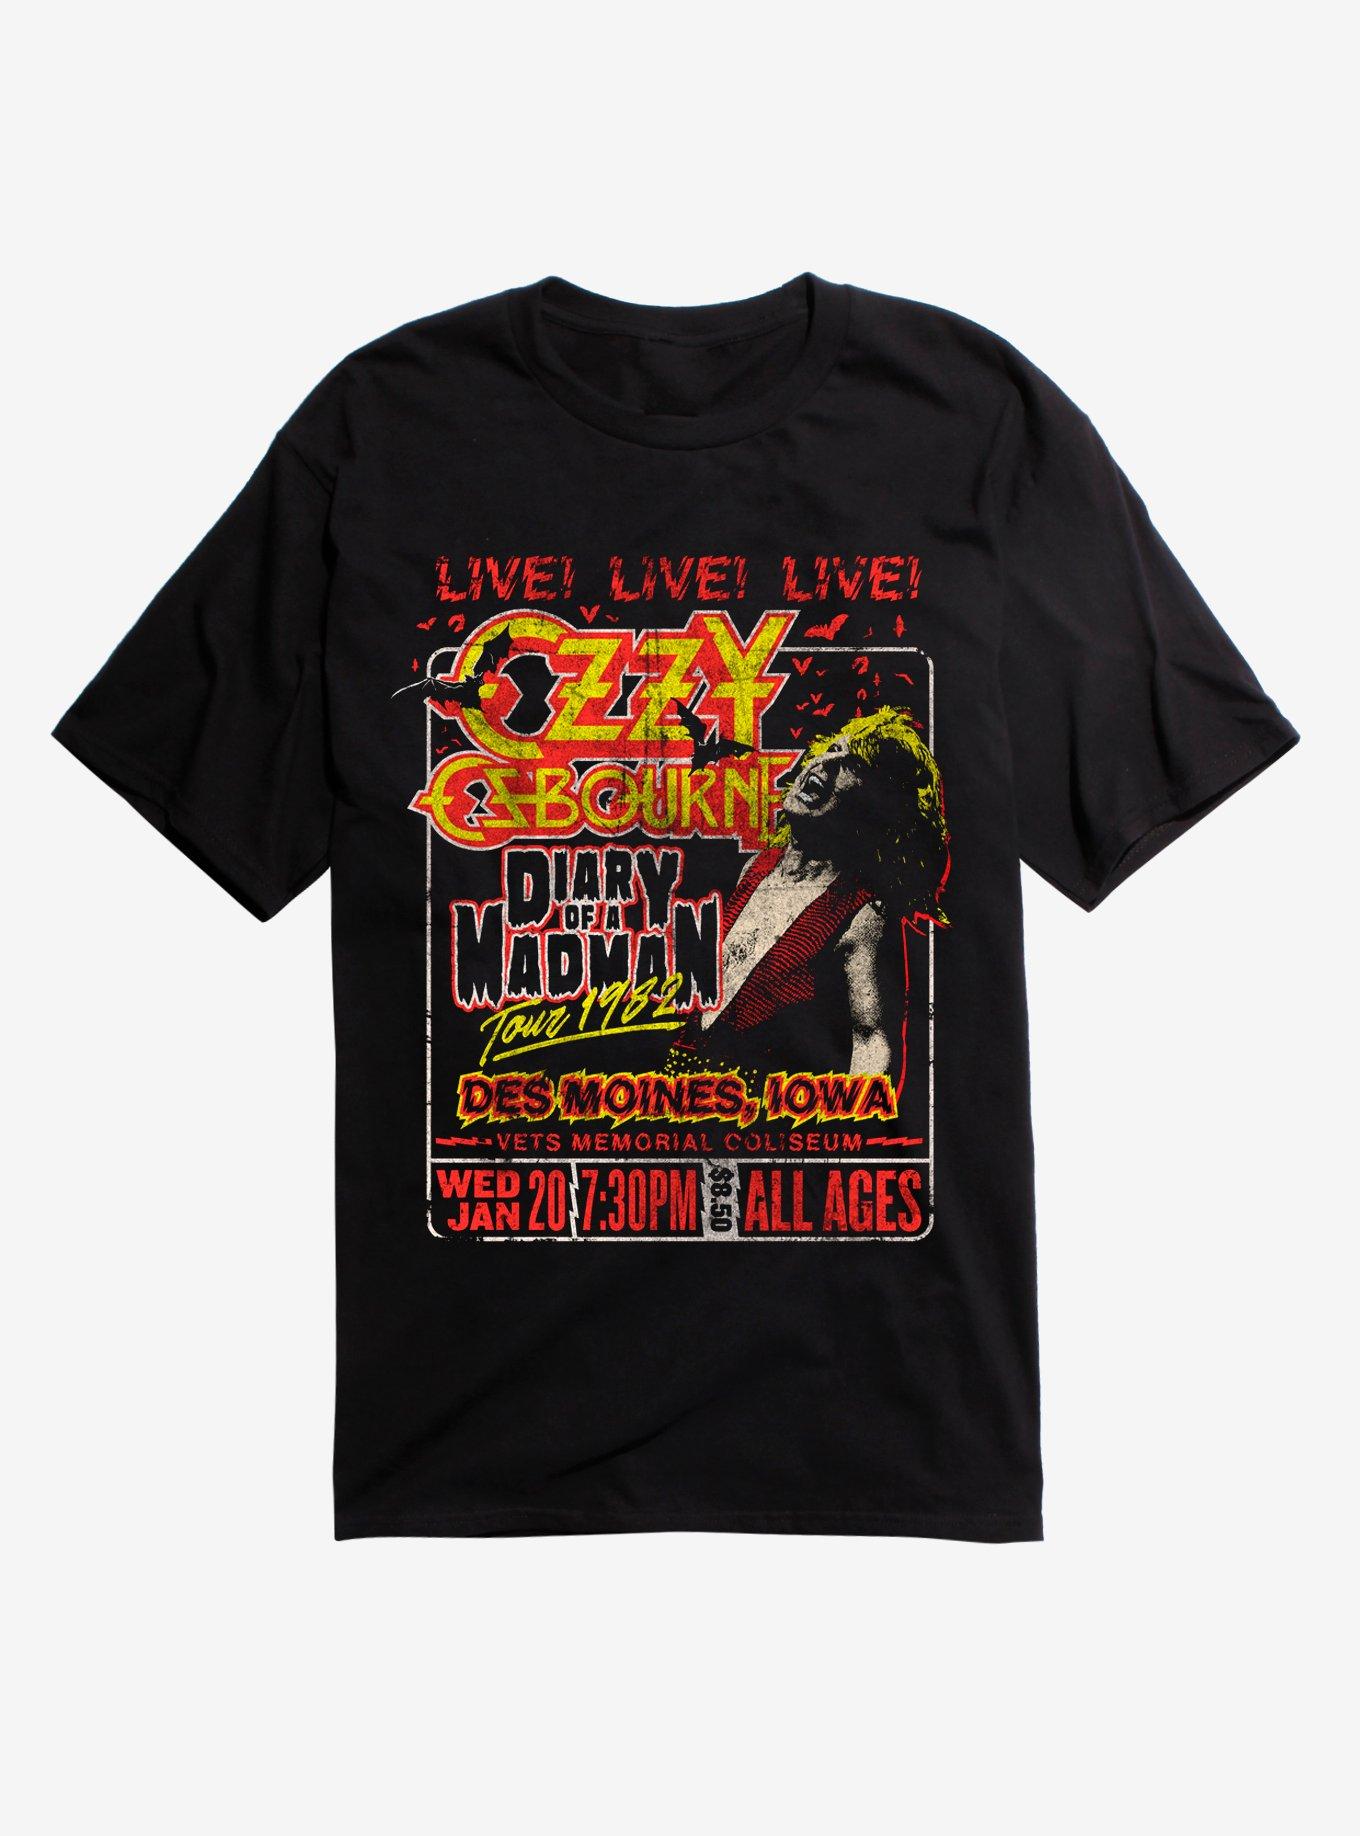 Ozzy Osbourne Diary Of A Madman Tour Poster T-Shirt | Hot Topic